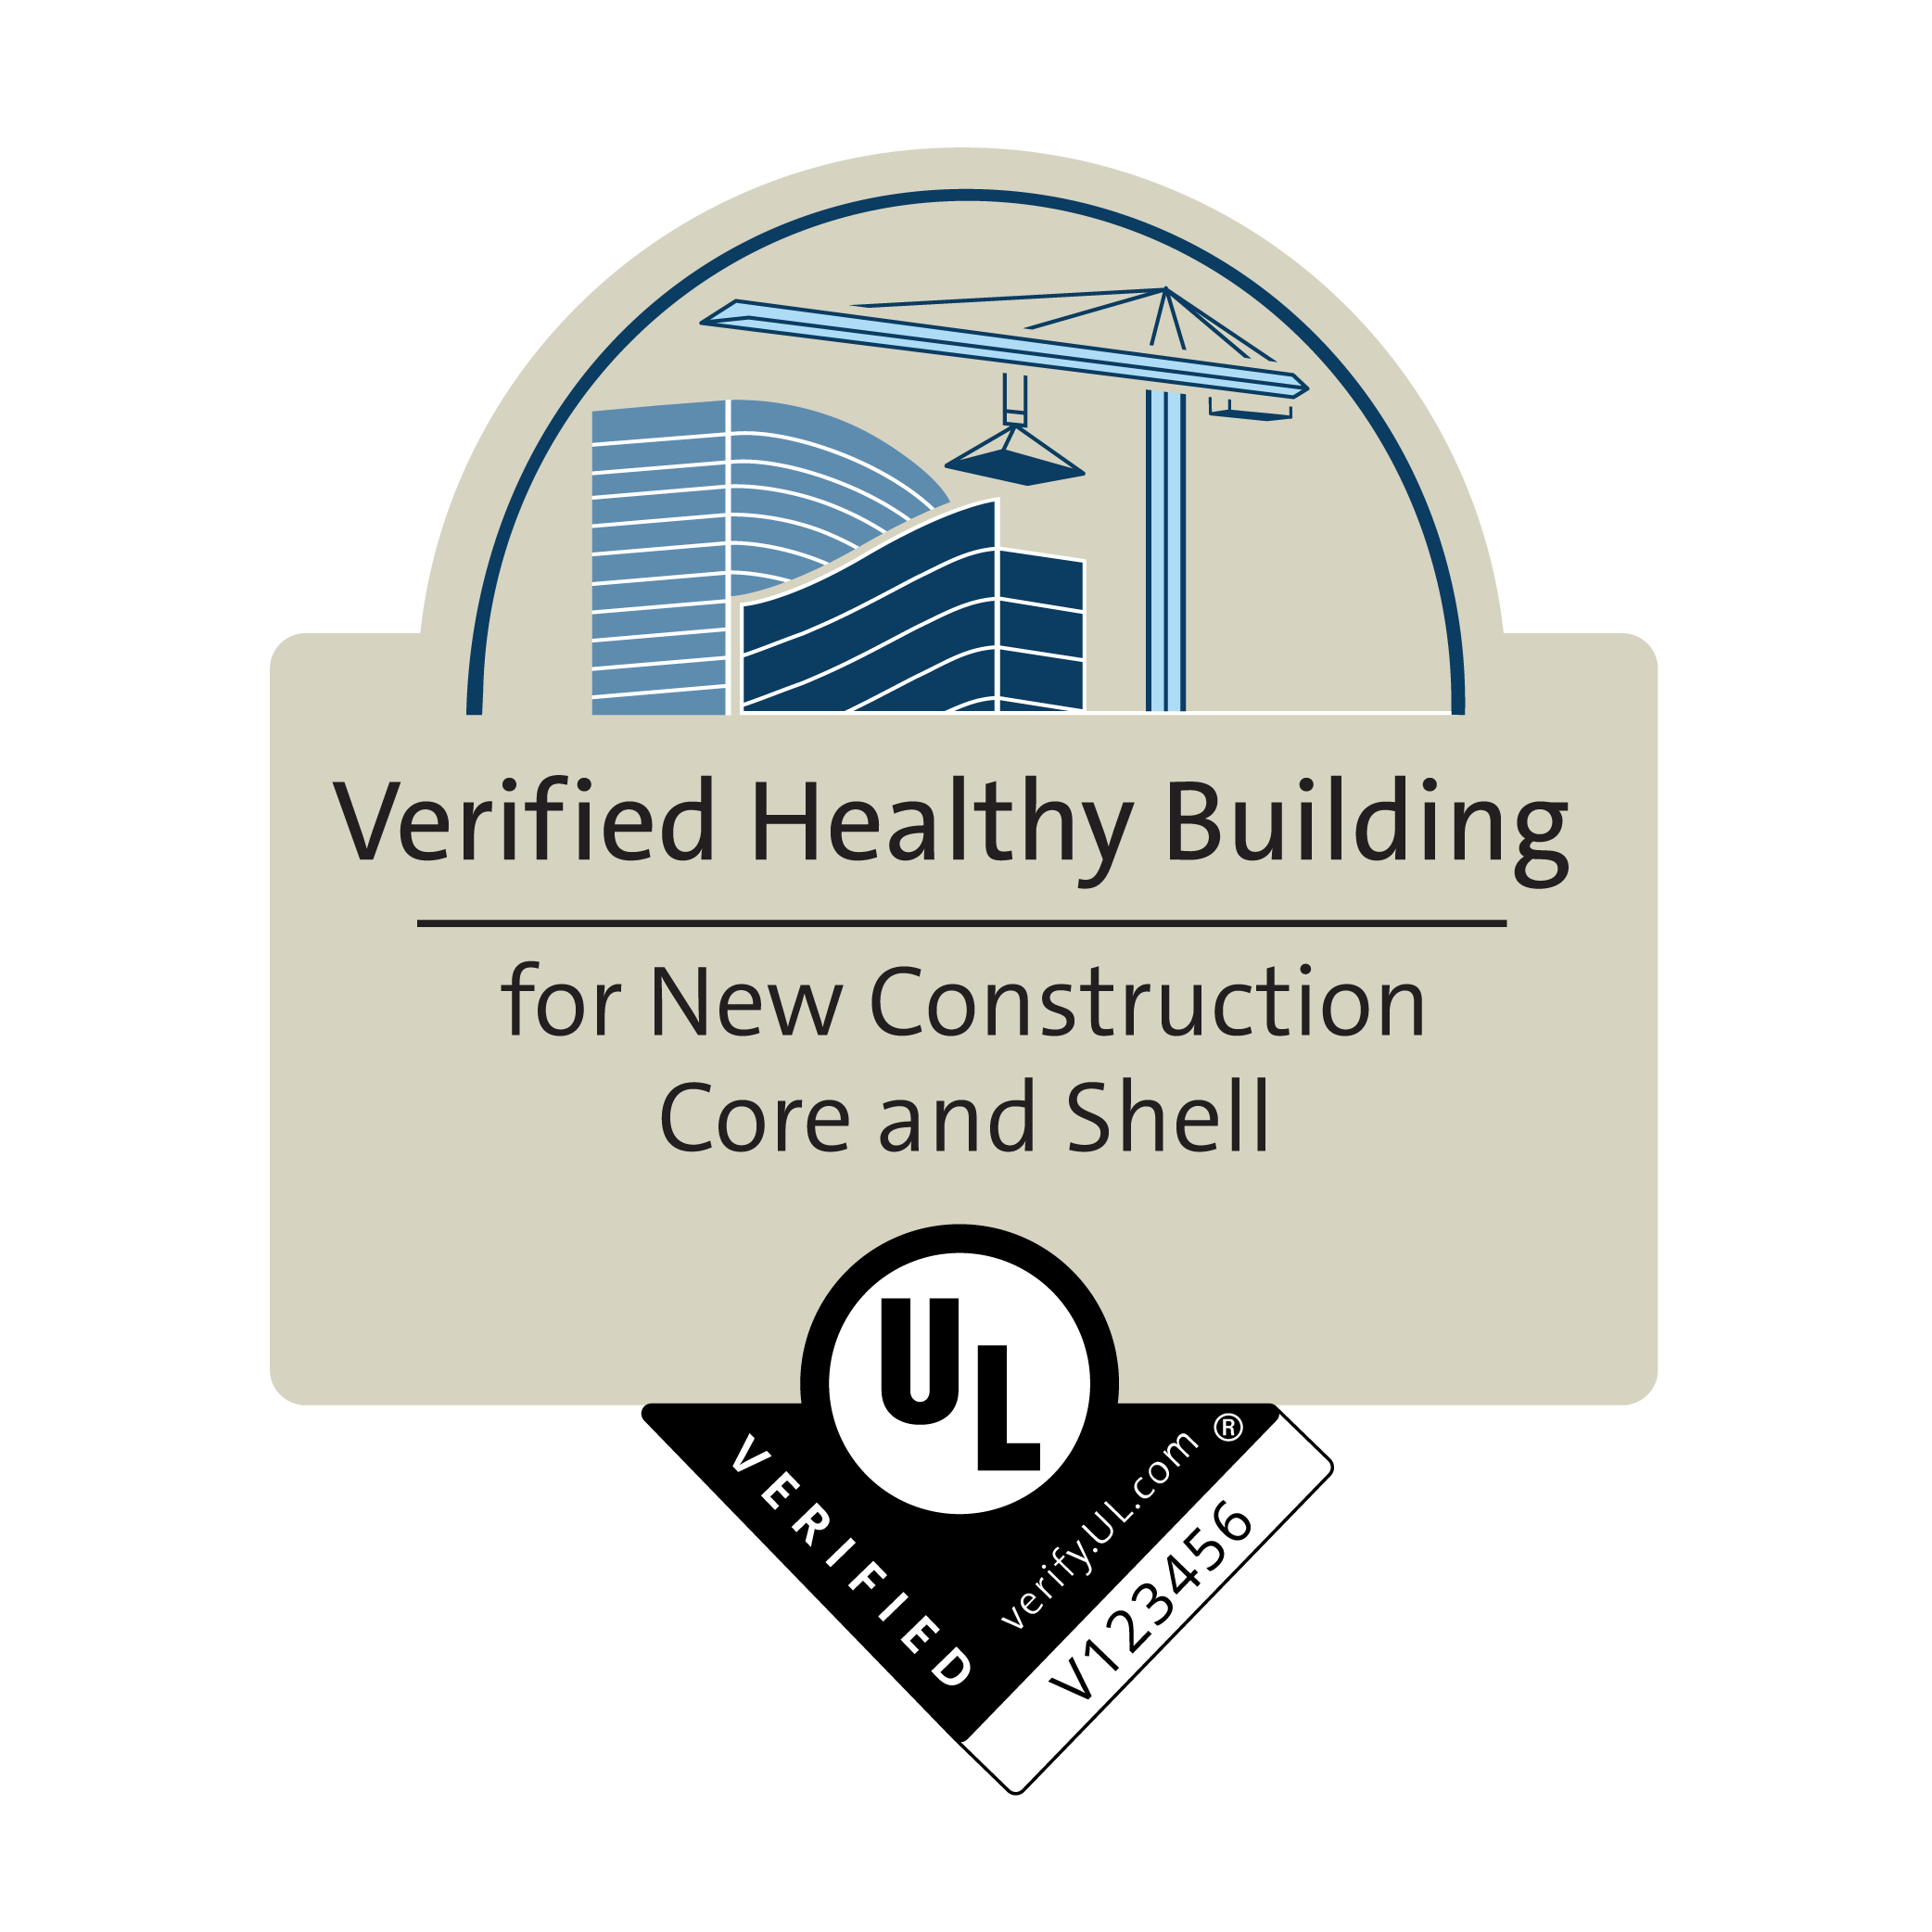 Verification Mark Healthy Building NewConstr Core Shell.